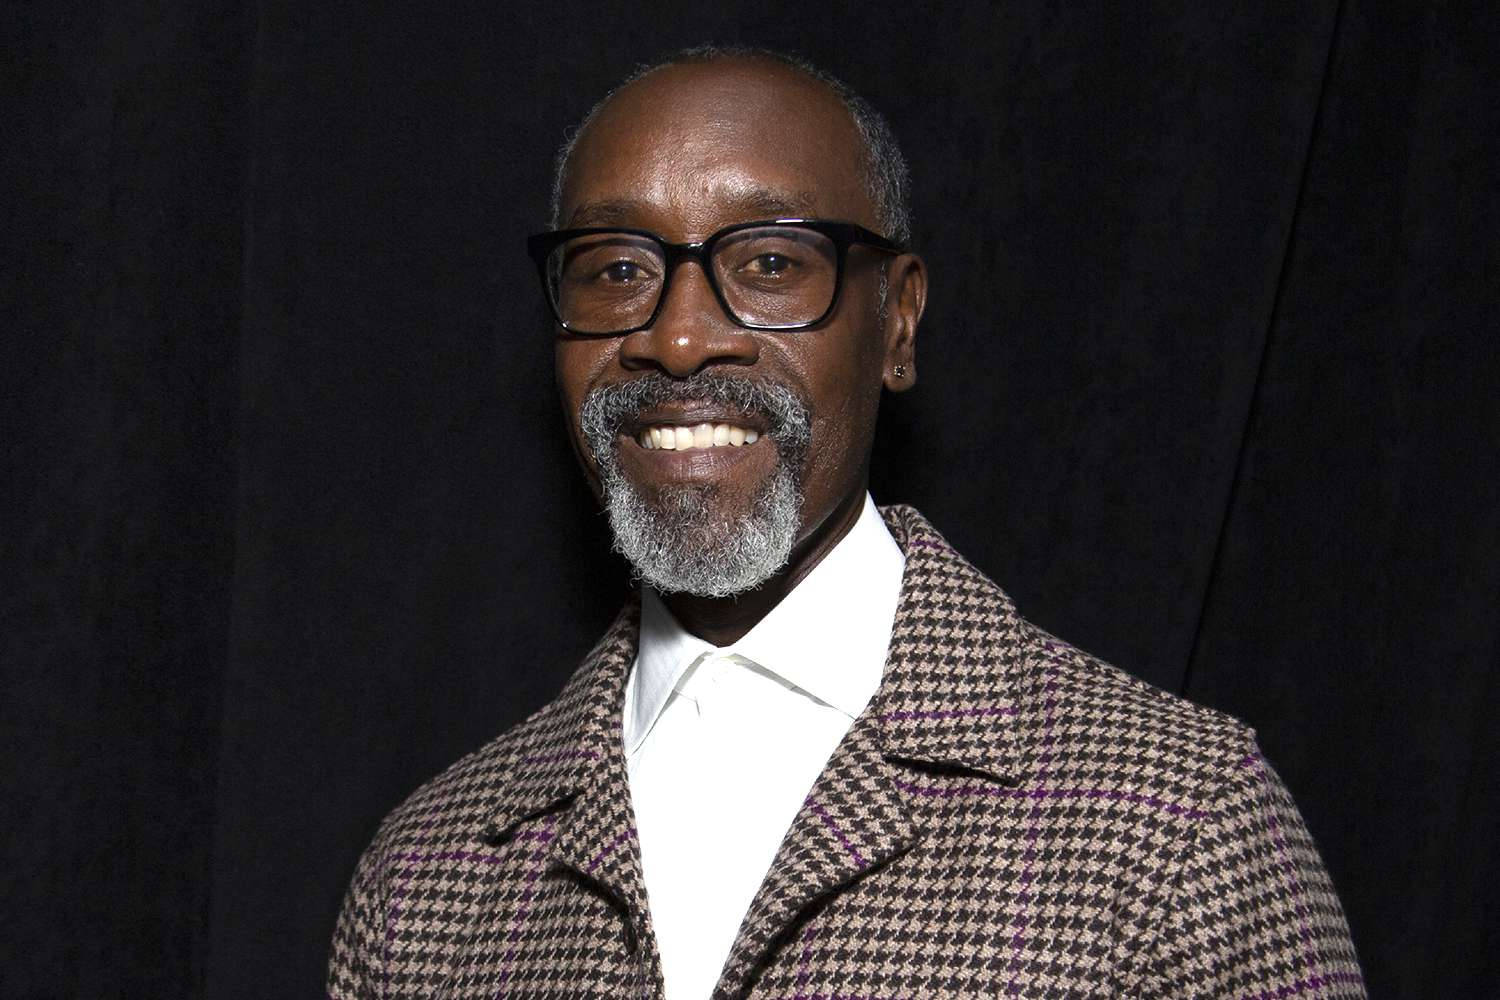 Don Cheadle displaying his mature side with a stylish beard Wallpaper